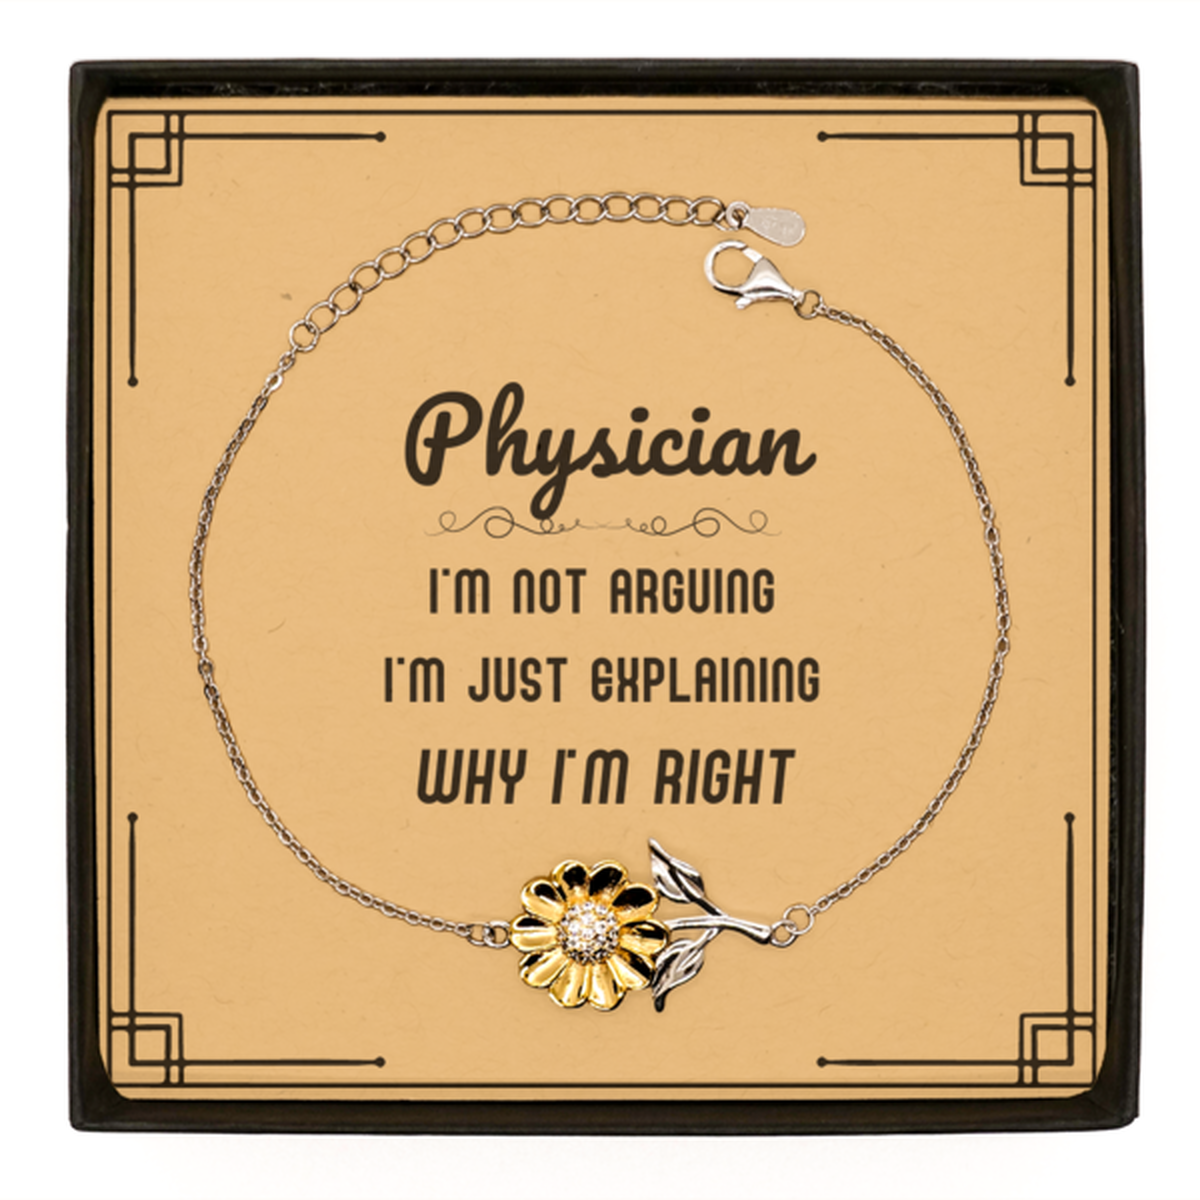 Physician I'm not Arguing. I'm Just Explaining Why I'm RIGHT Sunflower Bracelet, Funny Saying Quote Physician Gifts For Physician Message Card Graduation Birthday Christmas Gifts for Men Women Coworker